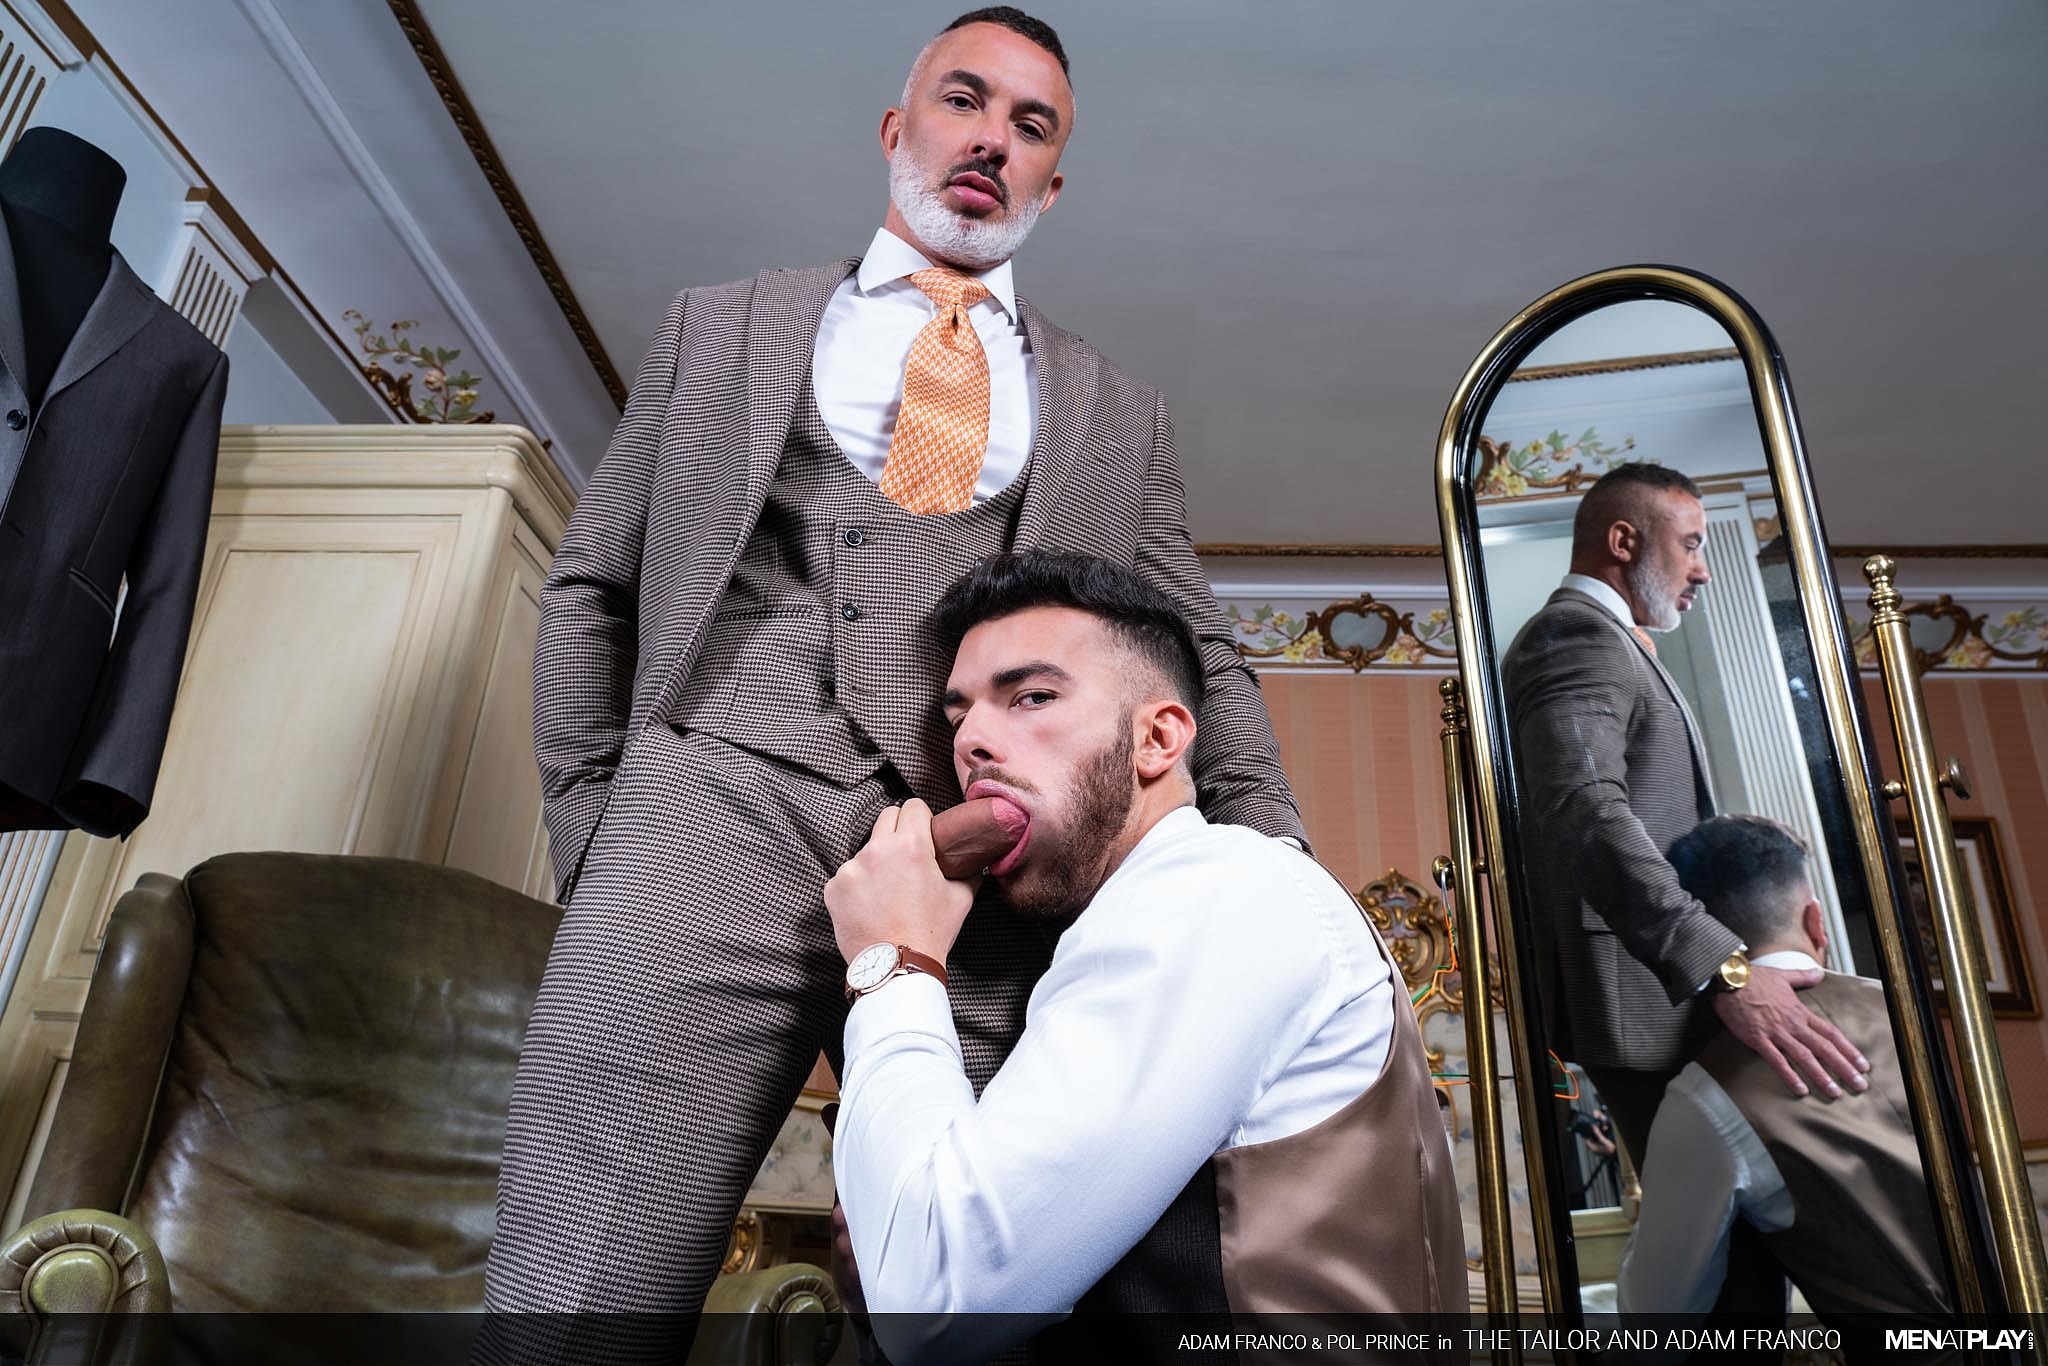 Adam_Franco_and_Pol_Prince_-_The_Tailor_And_Adam_Franco_720p_s3.jpg